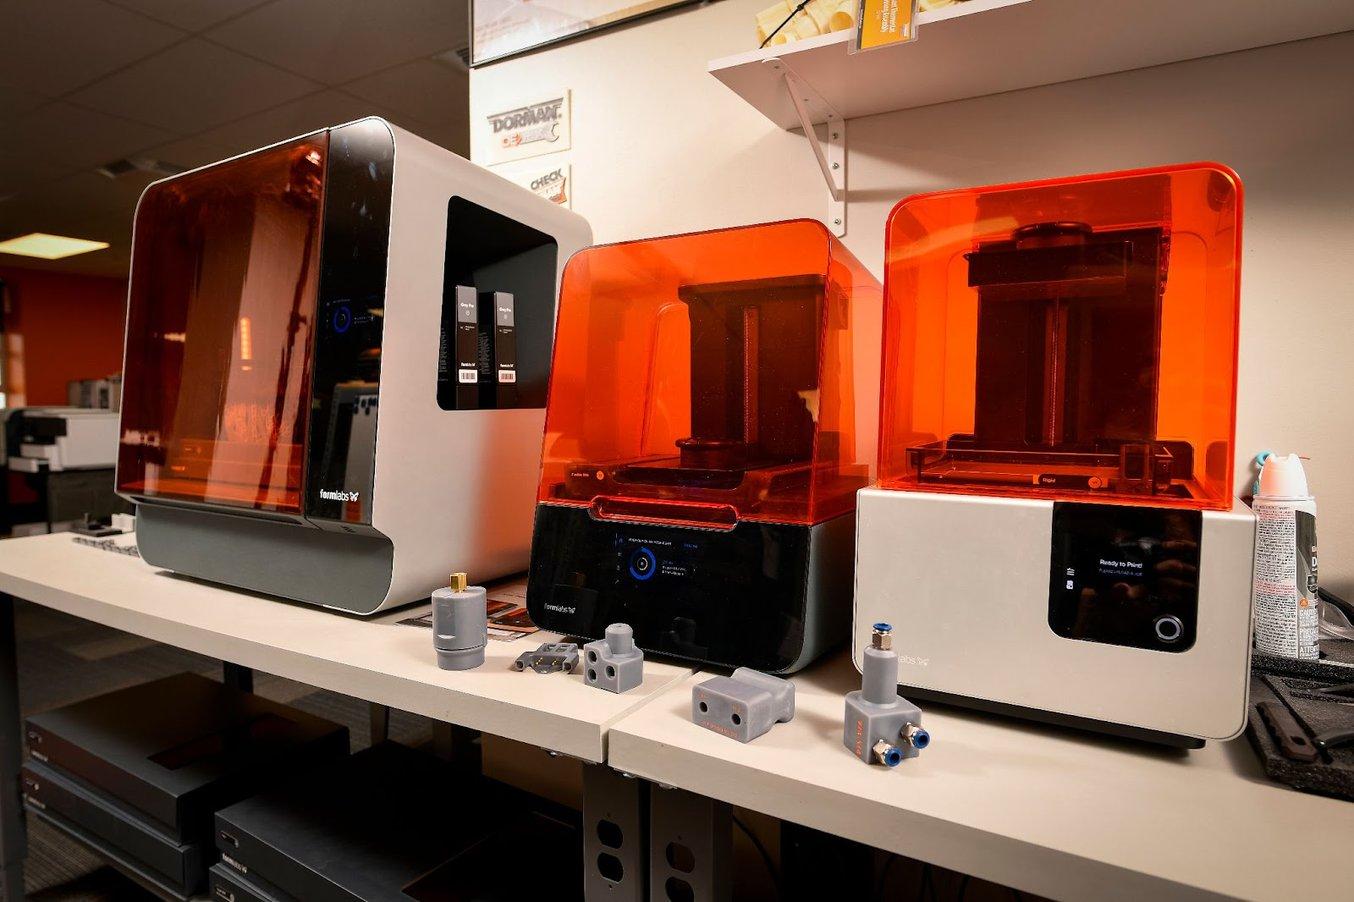 Dorman Products uses the Form 3L, Form 3+, and Form 2 stereolithography printers, seen here.